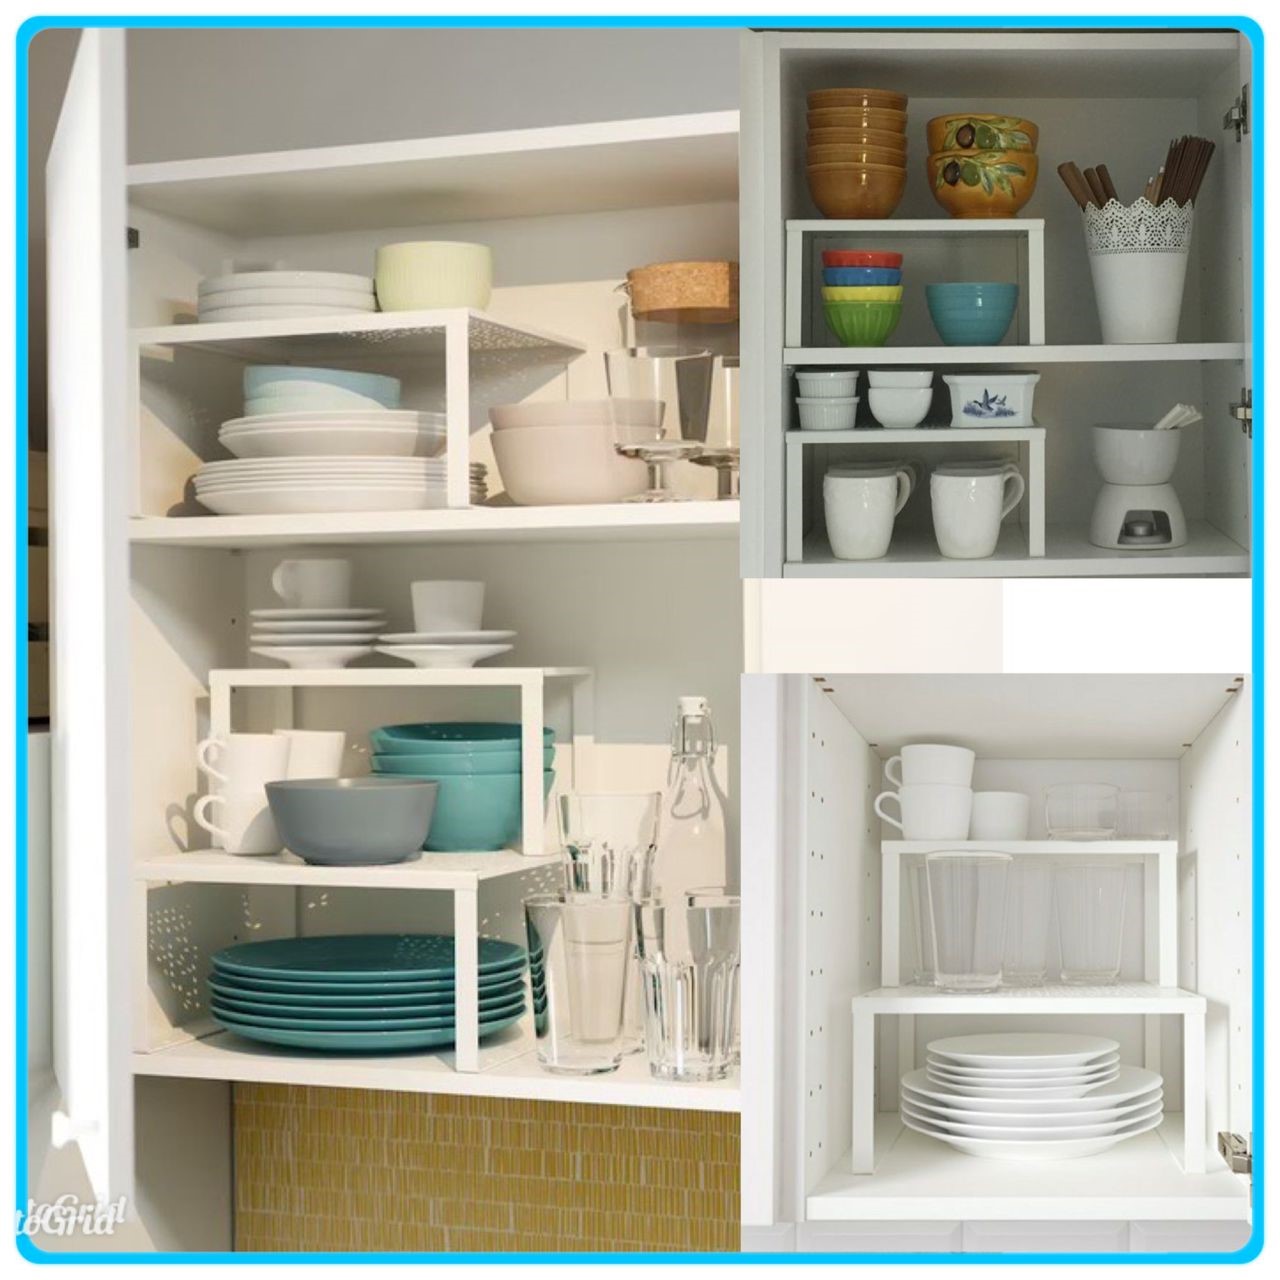 How to Use IKEA VARIERA Shelf Insert for More Cabinet Space